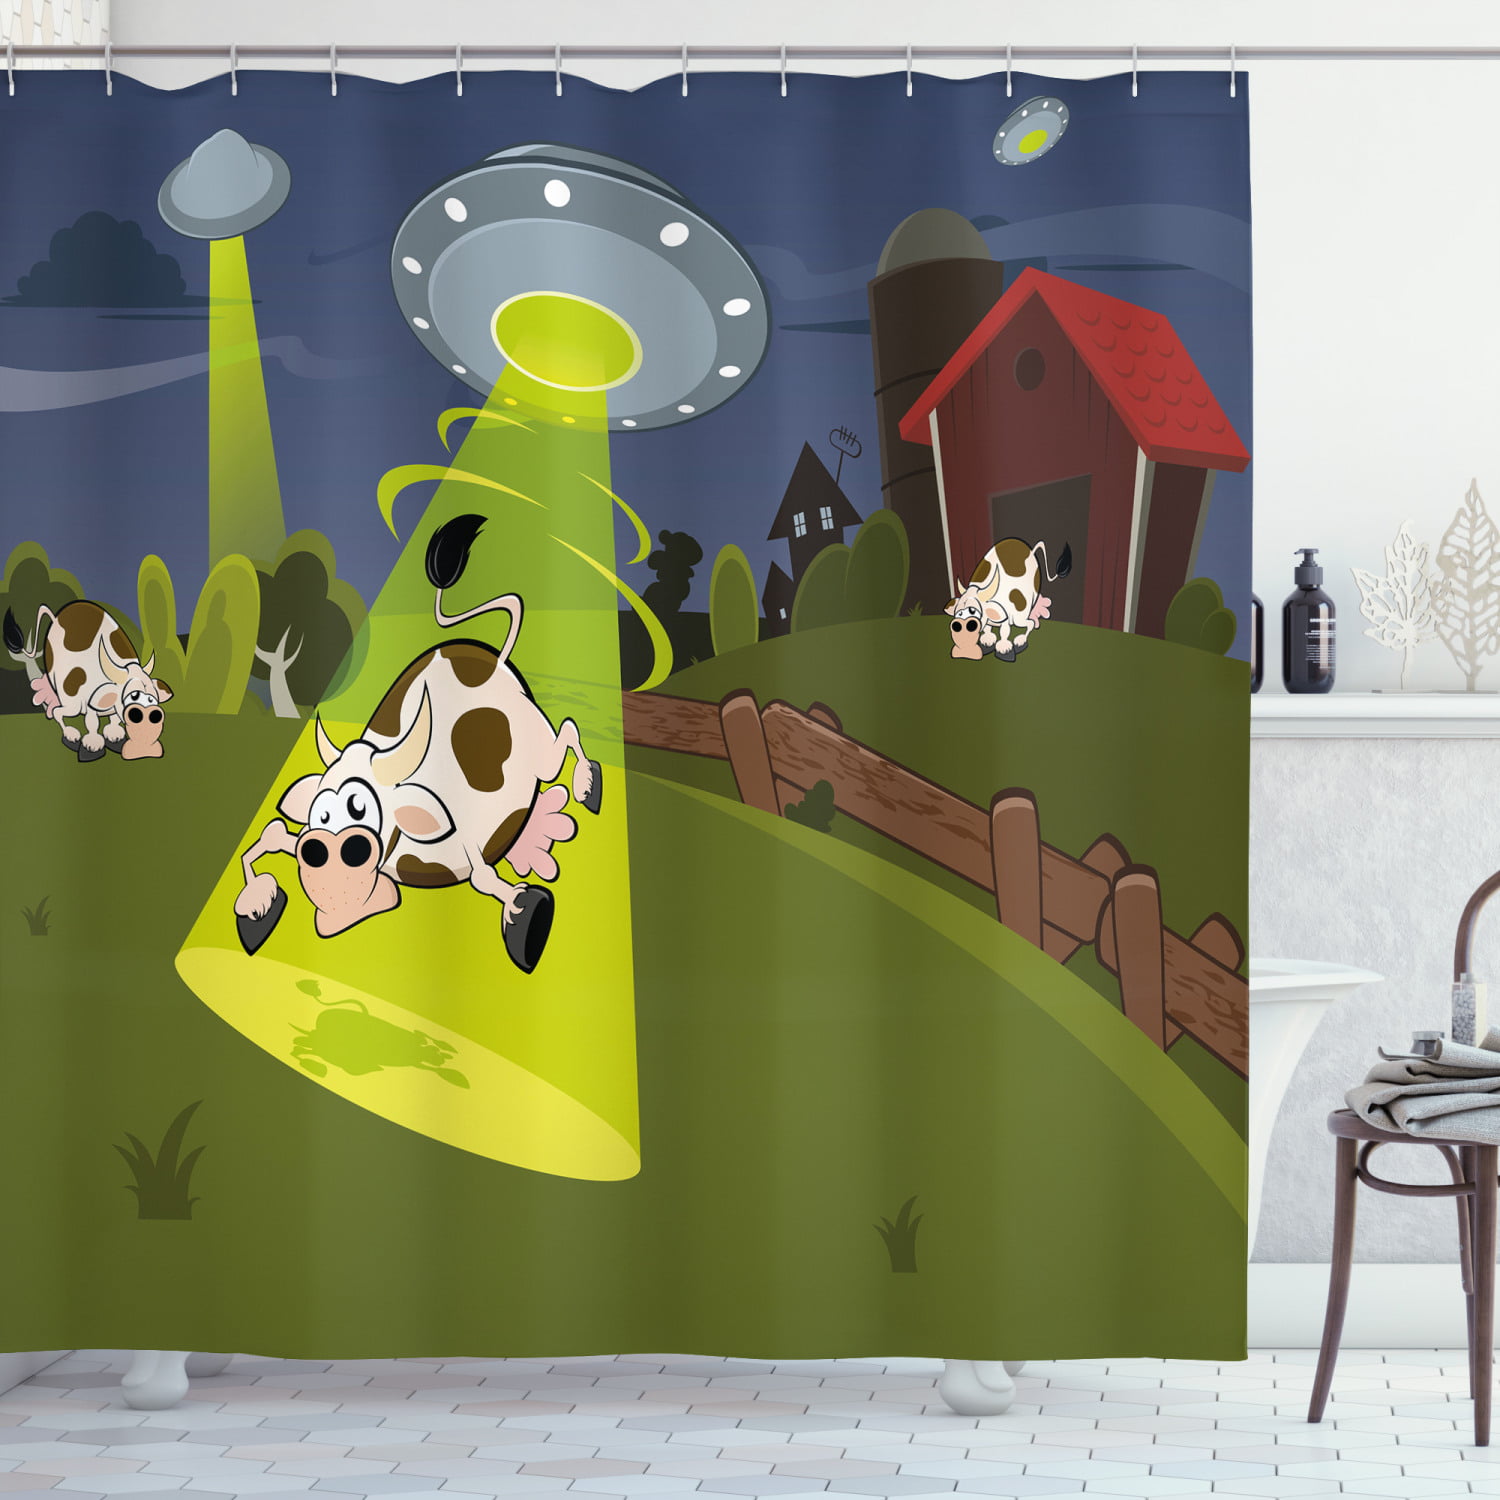 Cartoon Shower Curtain, Farm Warehouse Grass Fences Cow Alien Abduction  Funny Comics Image Artwork Print, Fabric Bathroom Set with Hooks, 69W X 70L  Inches, Multicolor, by Ambesonne 